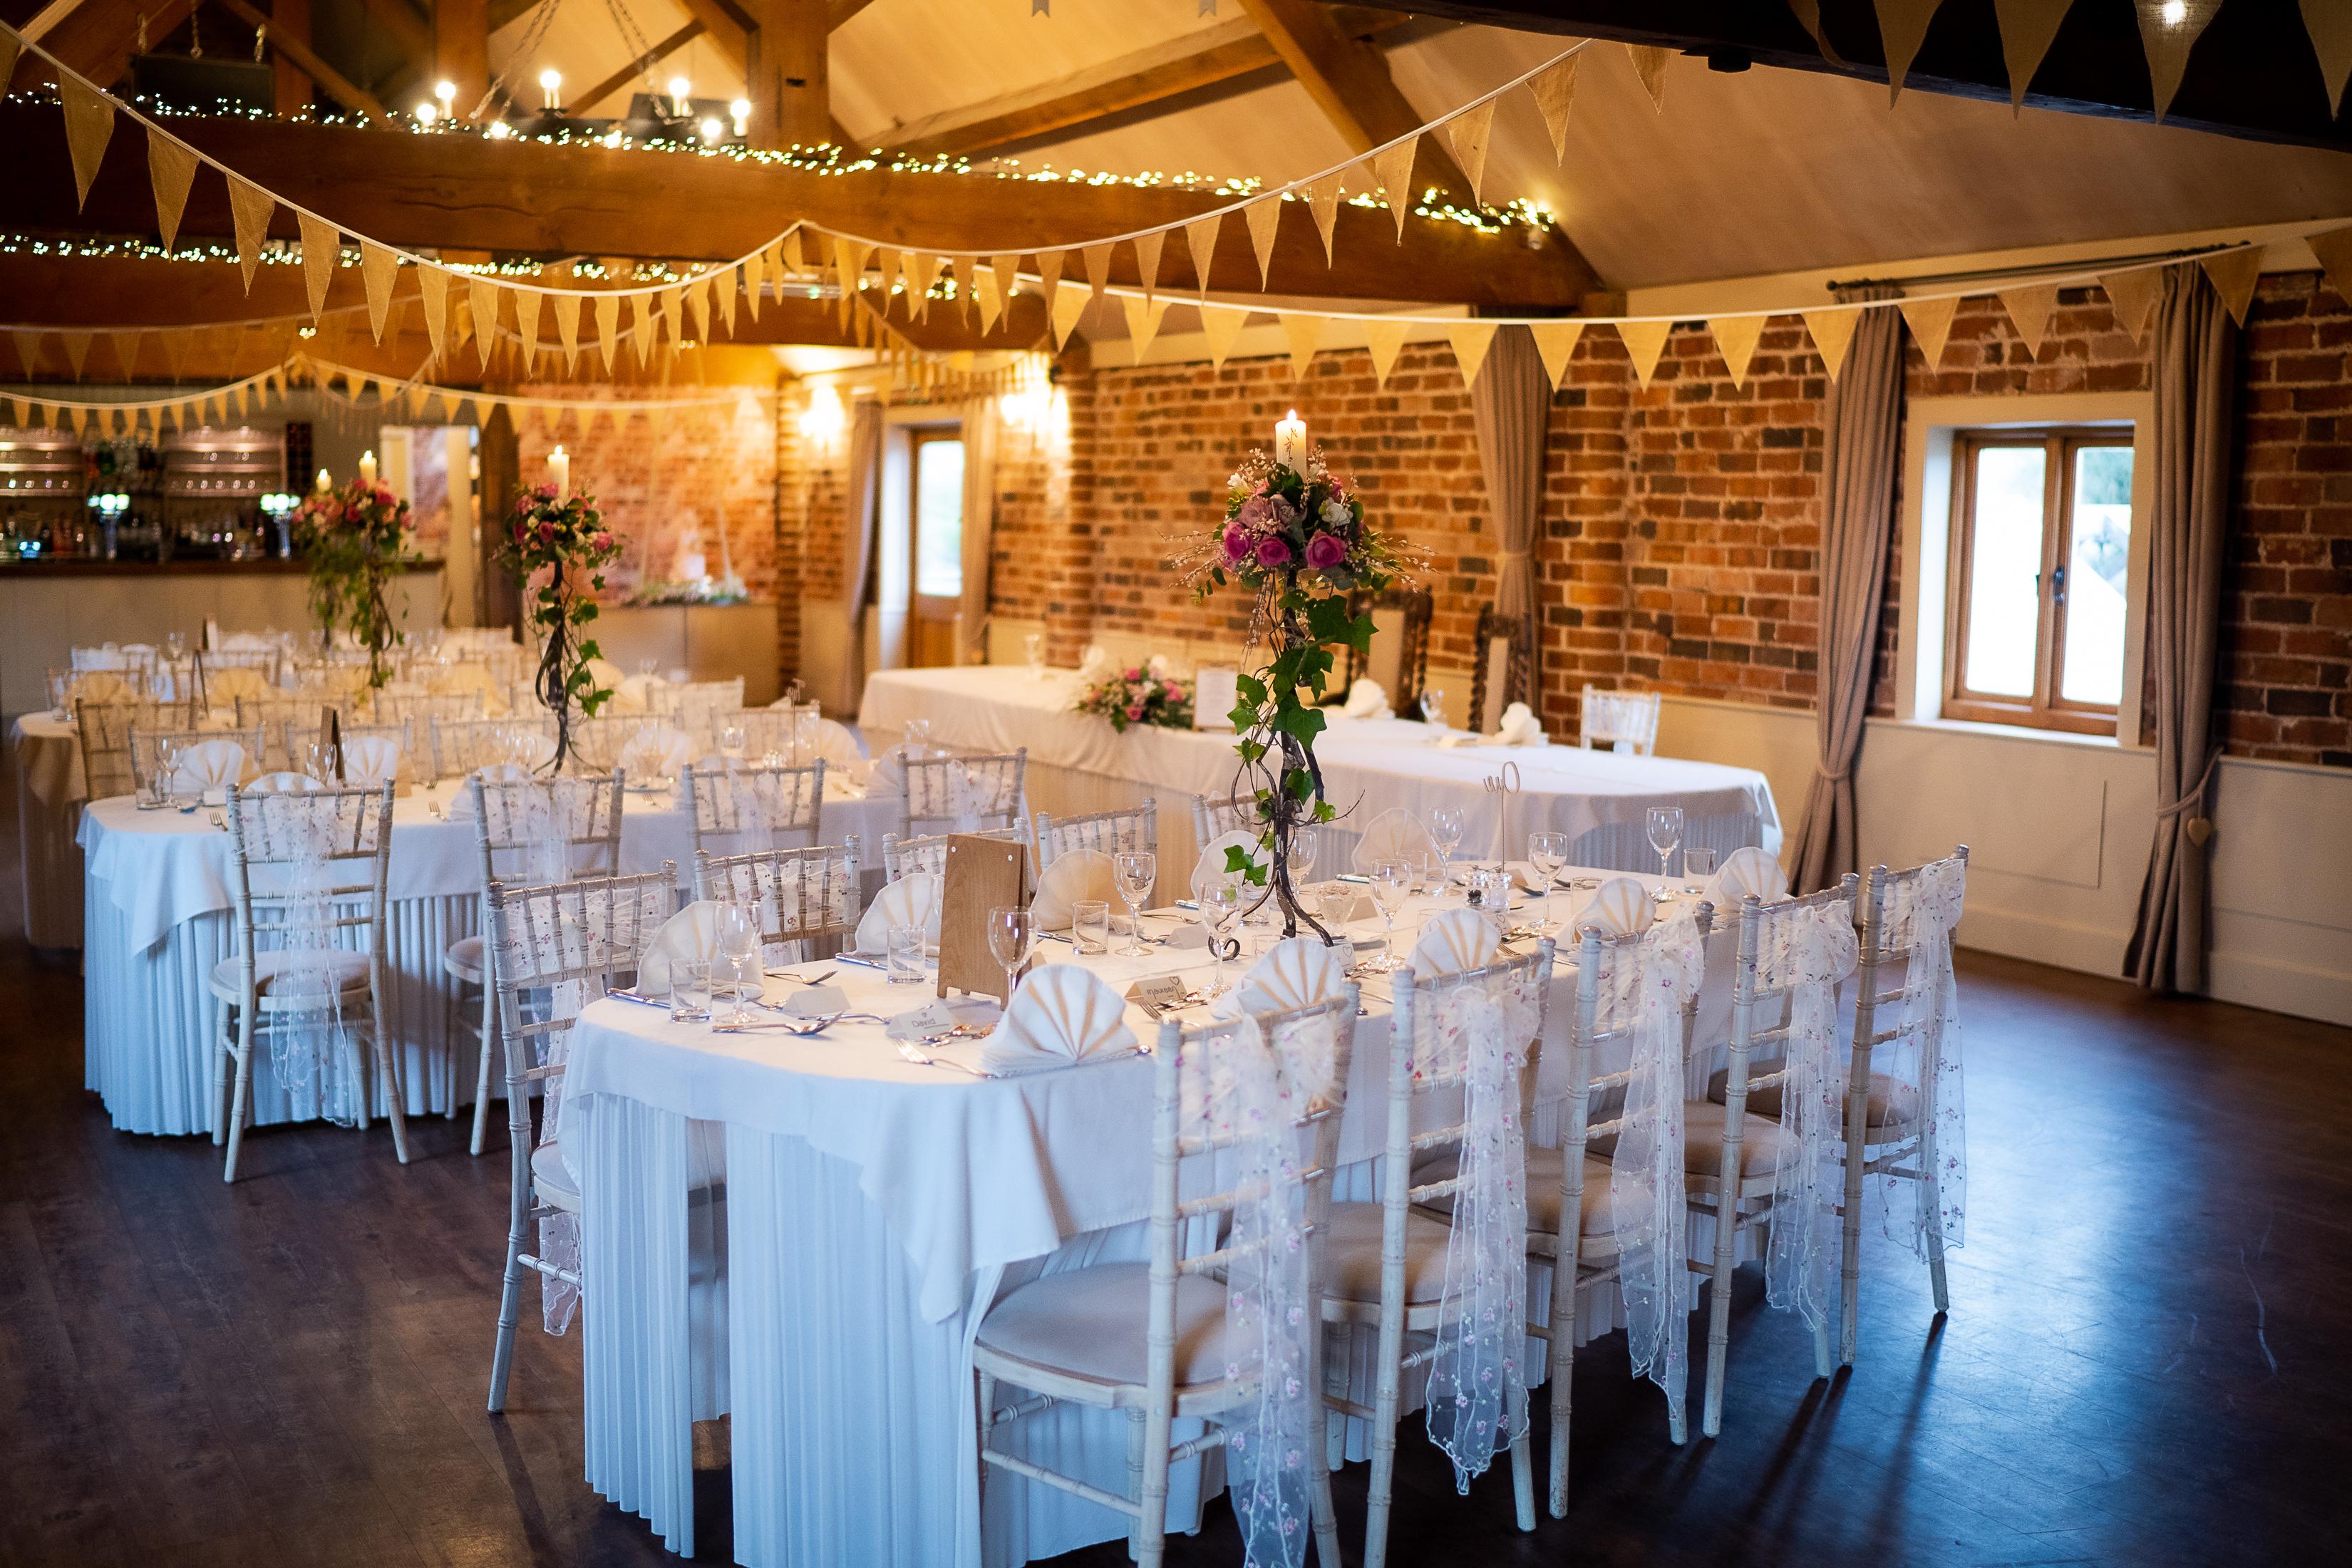 The Blakelands Estate, The Maltings Barn Daytime Event Hire photo #1